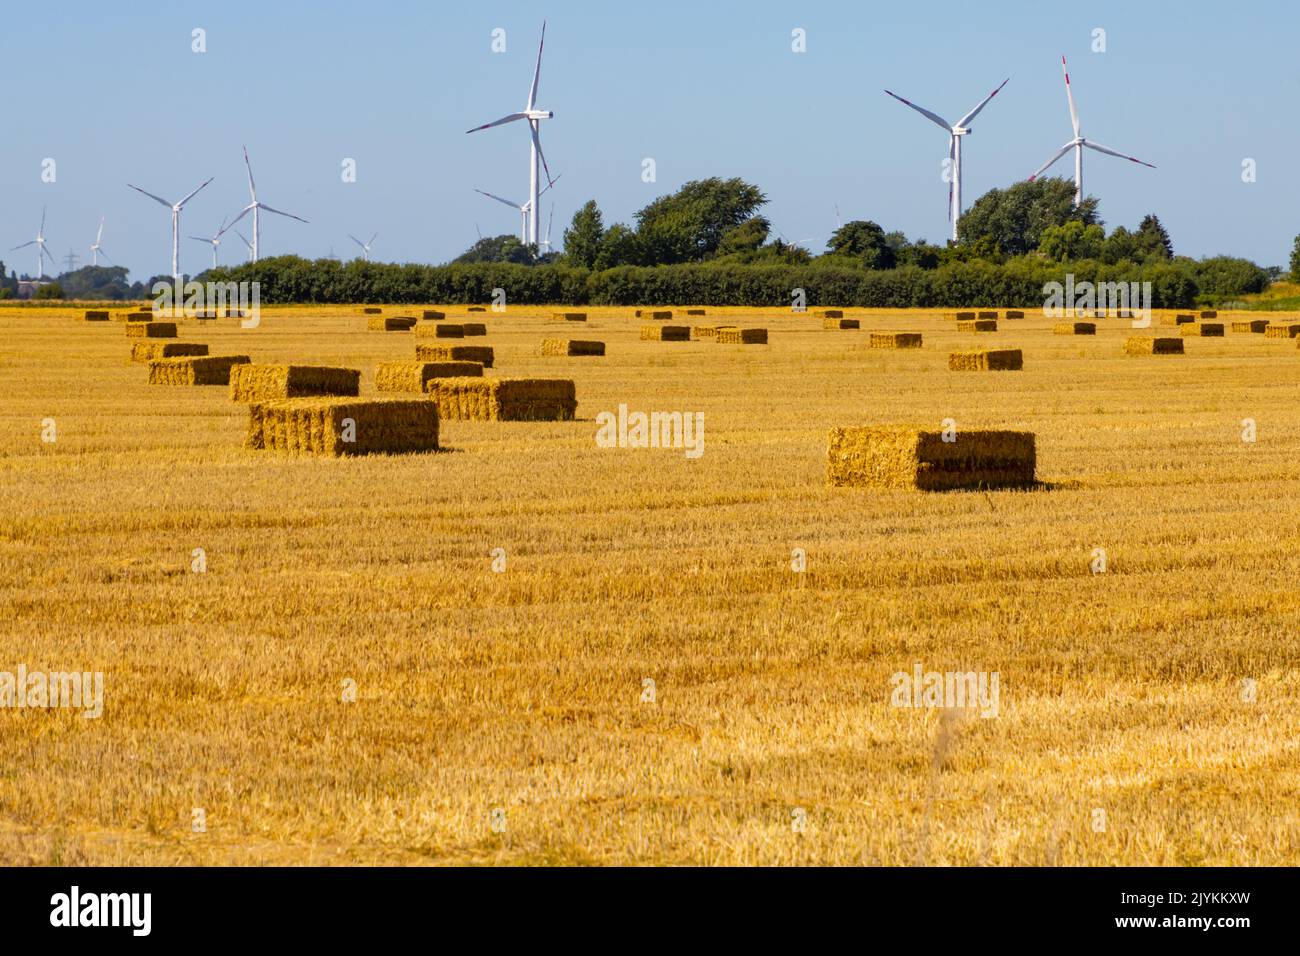 Renewable energy wind turbines behind a freshly harvested agricultural field with square hay bales Stock Photo